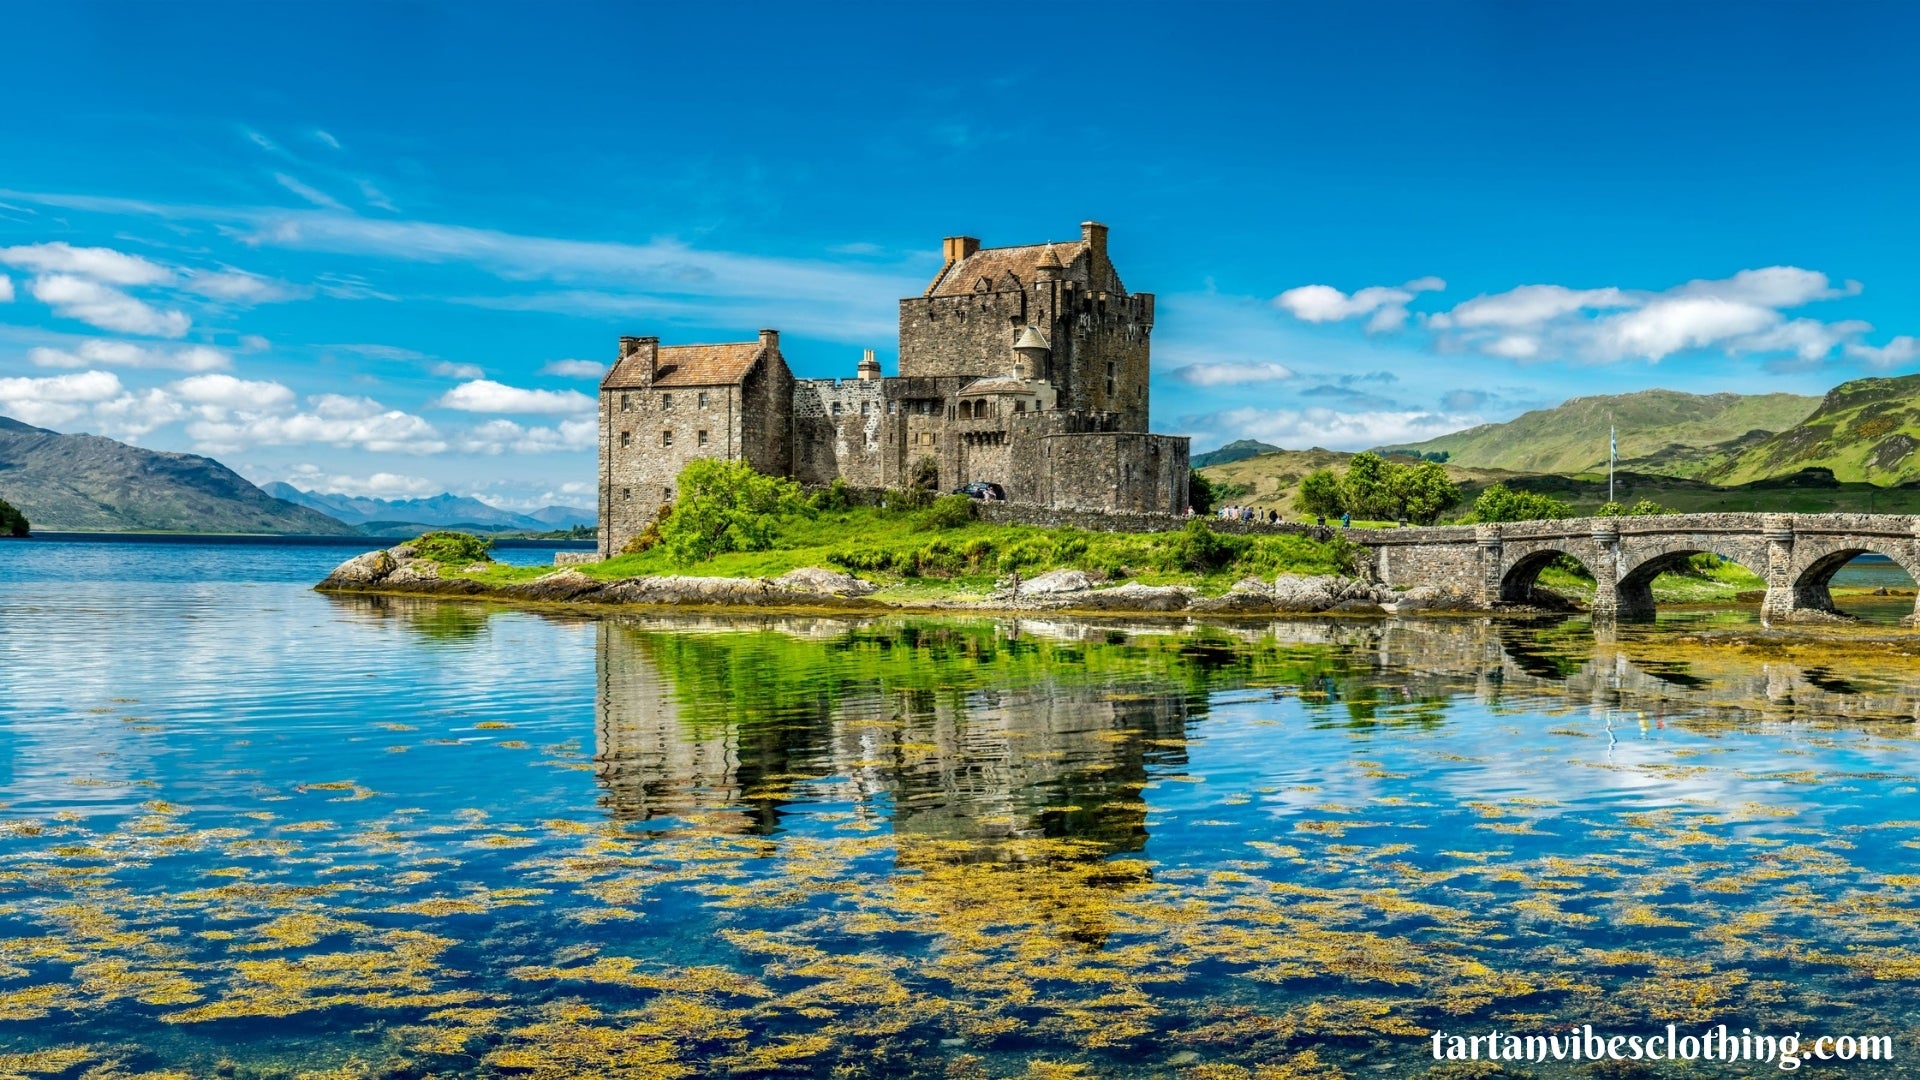 Eilean Donan Castle - stronghold of the Clan Mackenzie